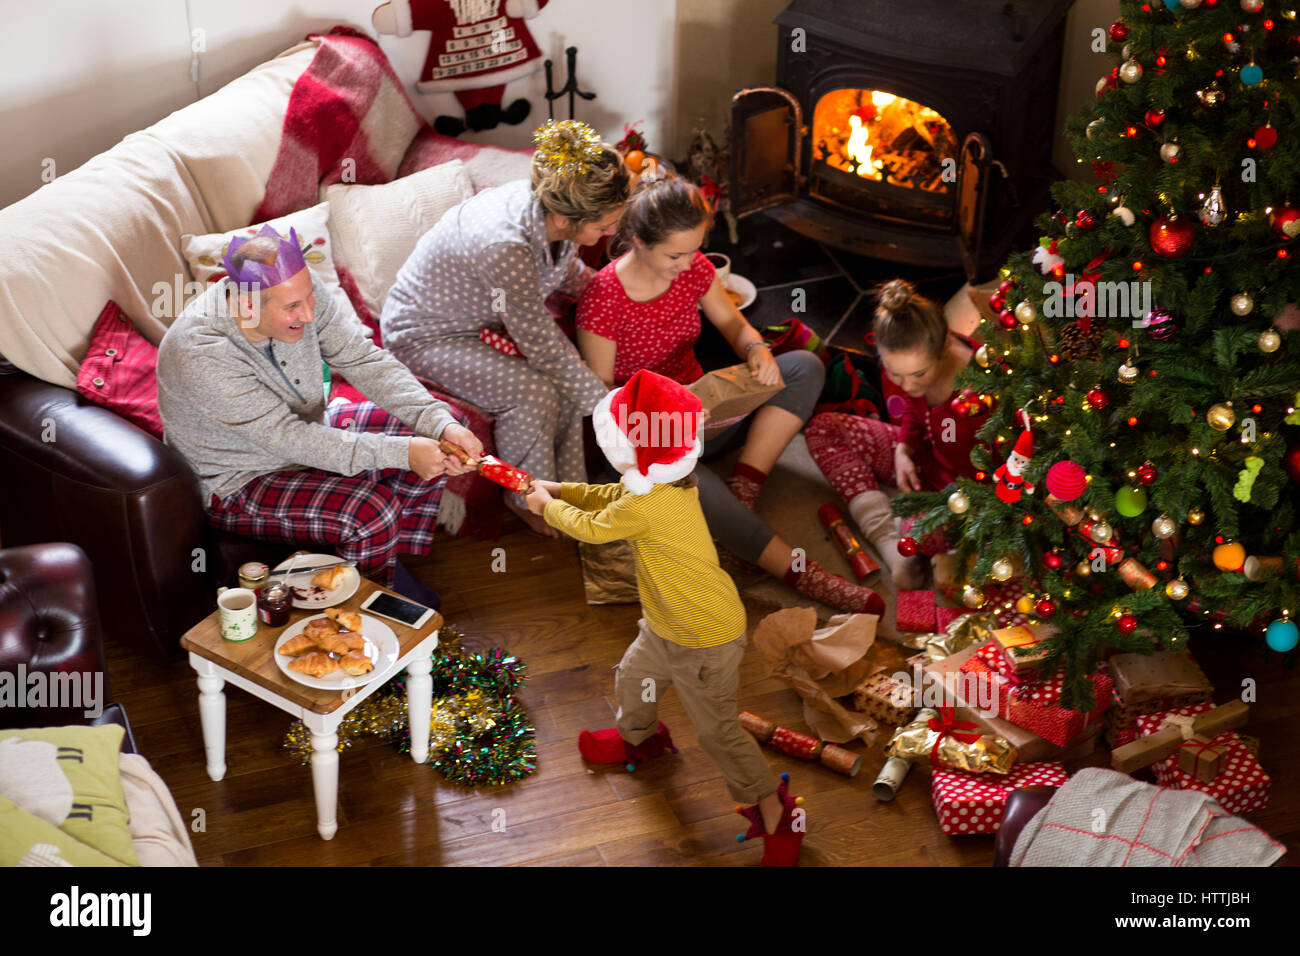 Family at Christmas. They are opening presents and pulling crackers. Stock Photo